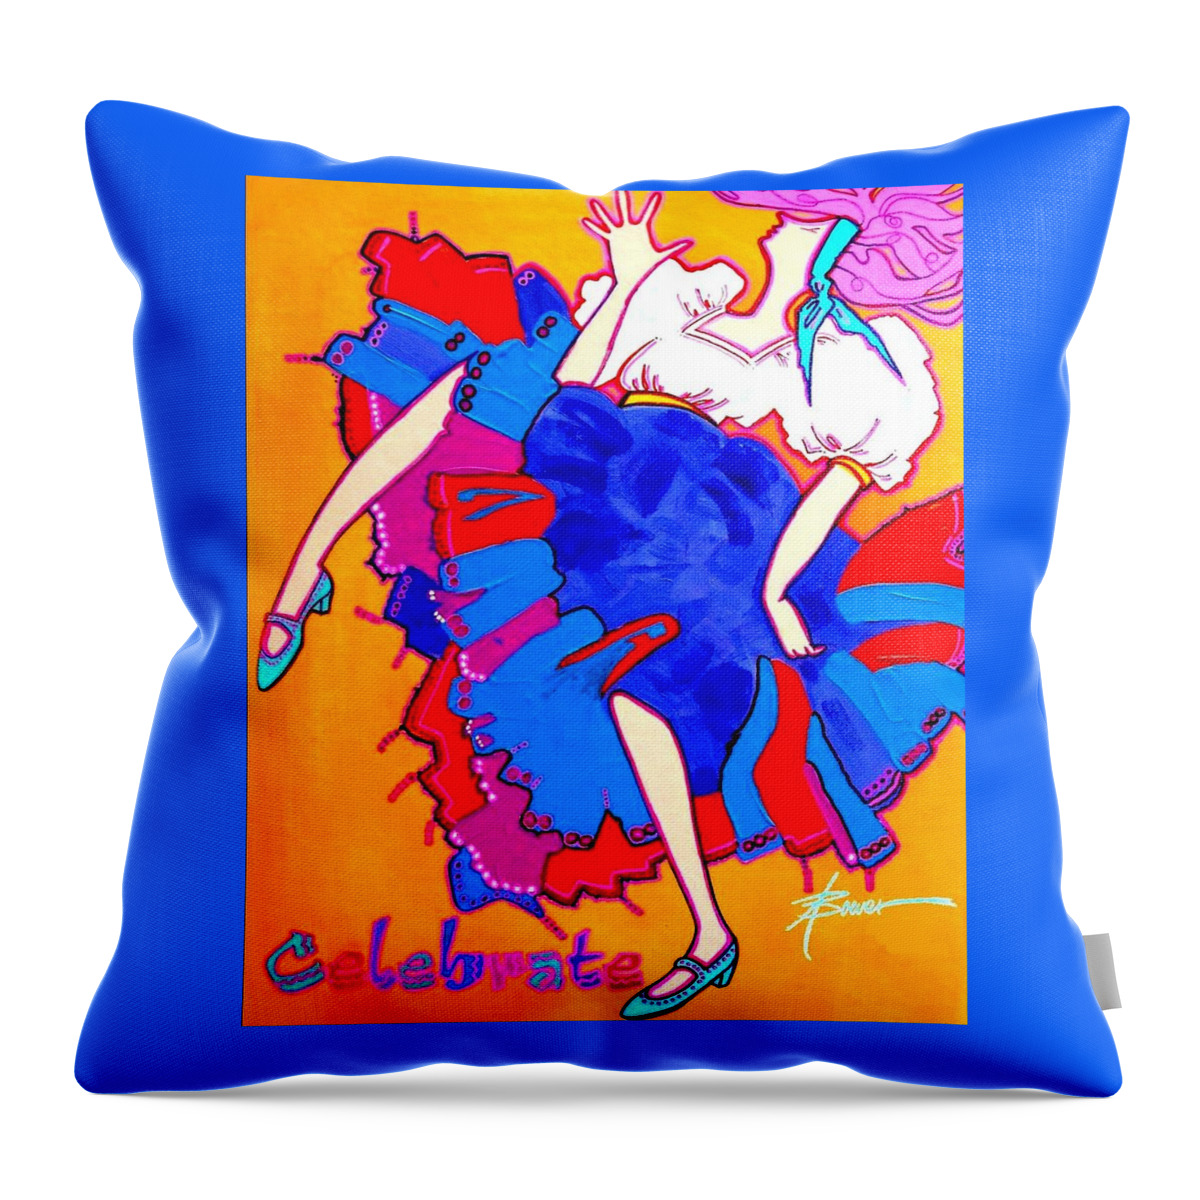 Celebration Throw Pillow featuring the painting Celebrate by Adele Bower